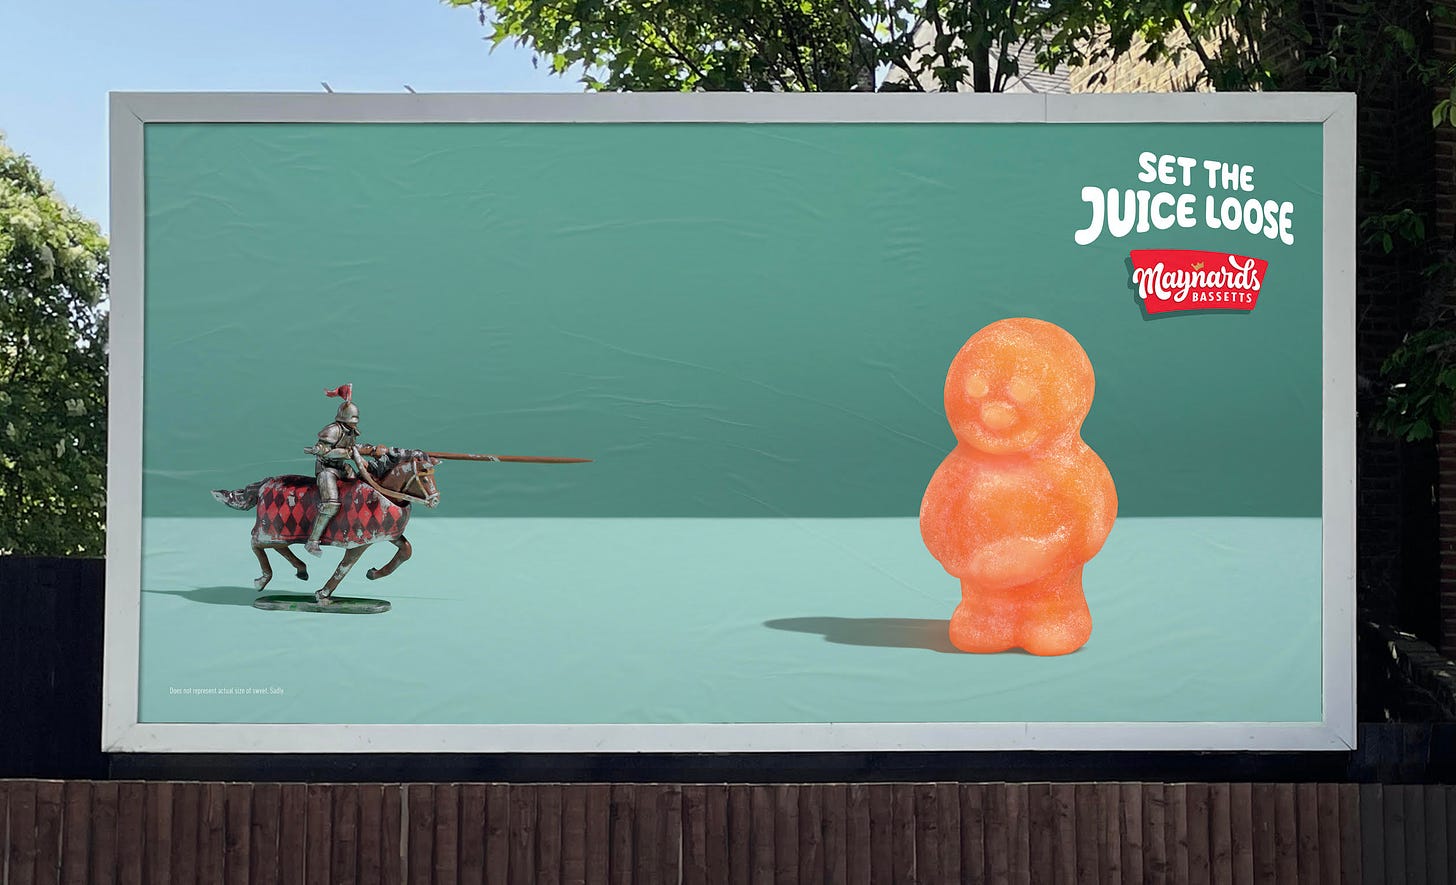 Poster showcasing a miniature model jouster on the left looking like it will pierce the skin of an orange jelly baby stood on the right side of the poster. Logo for Maynards Bassetts with endline saying set the juice loose in top right corner. 
The concept is to leave the viewer to imagine that when the jouster pierces the skin of the sweet it would set the juice loose much like the explosion of flavour that happens in your mouth when eating Jelly Babies. 